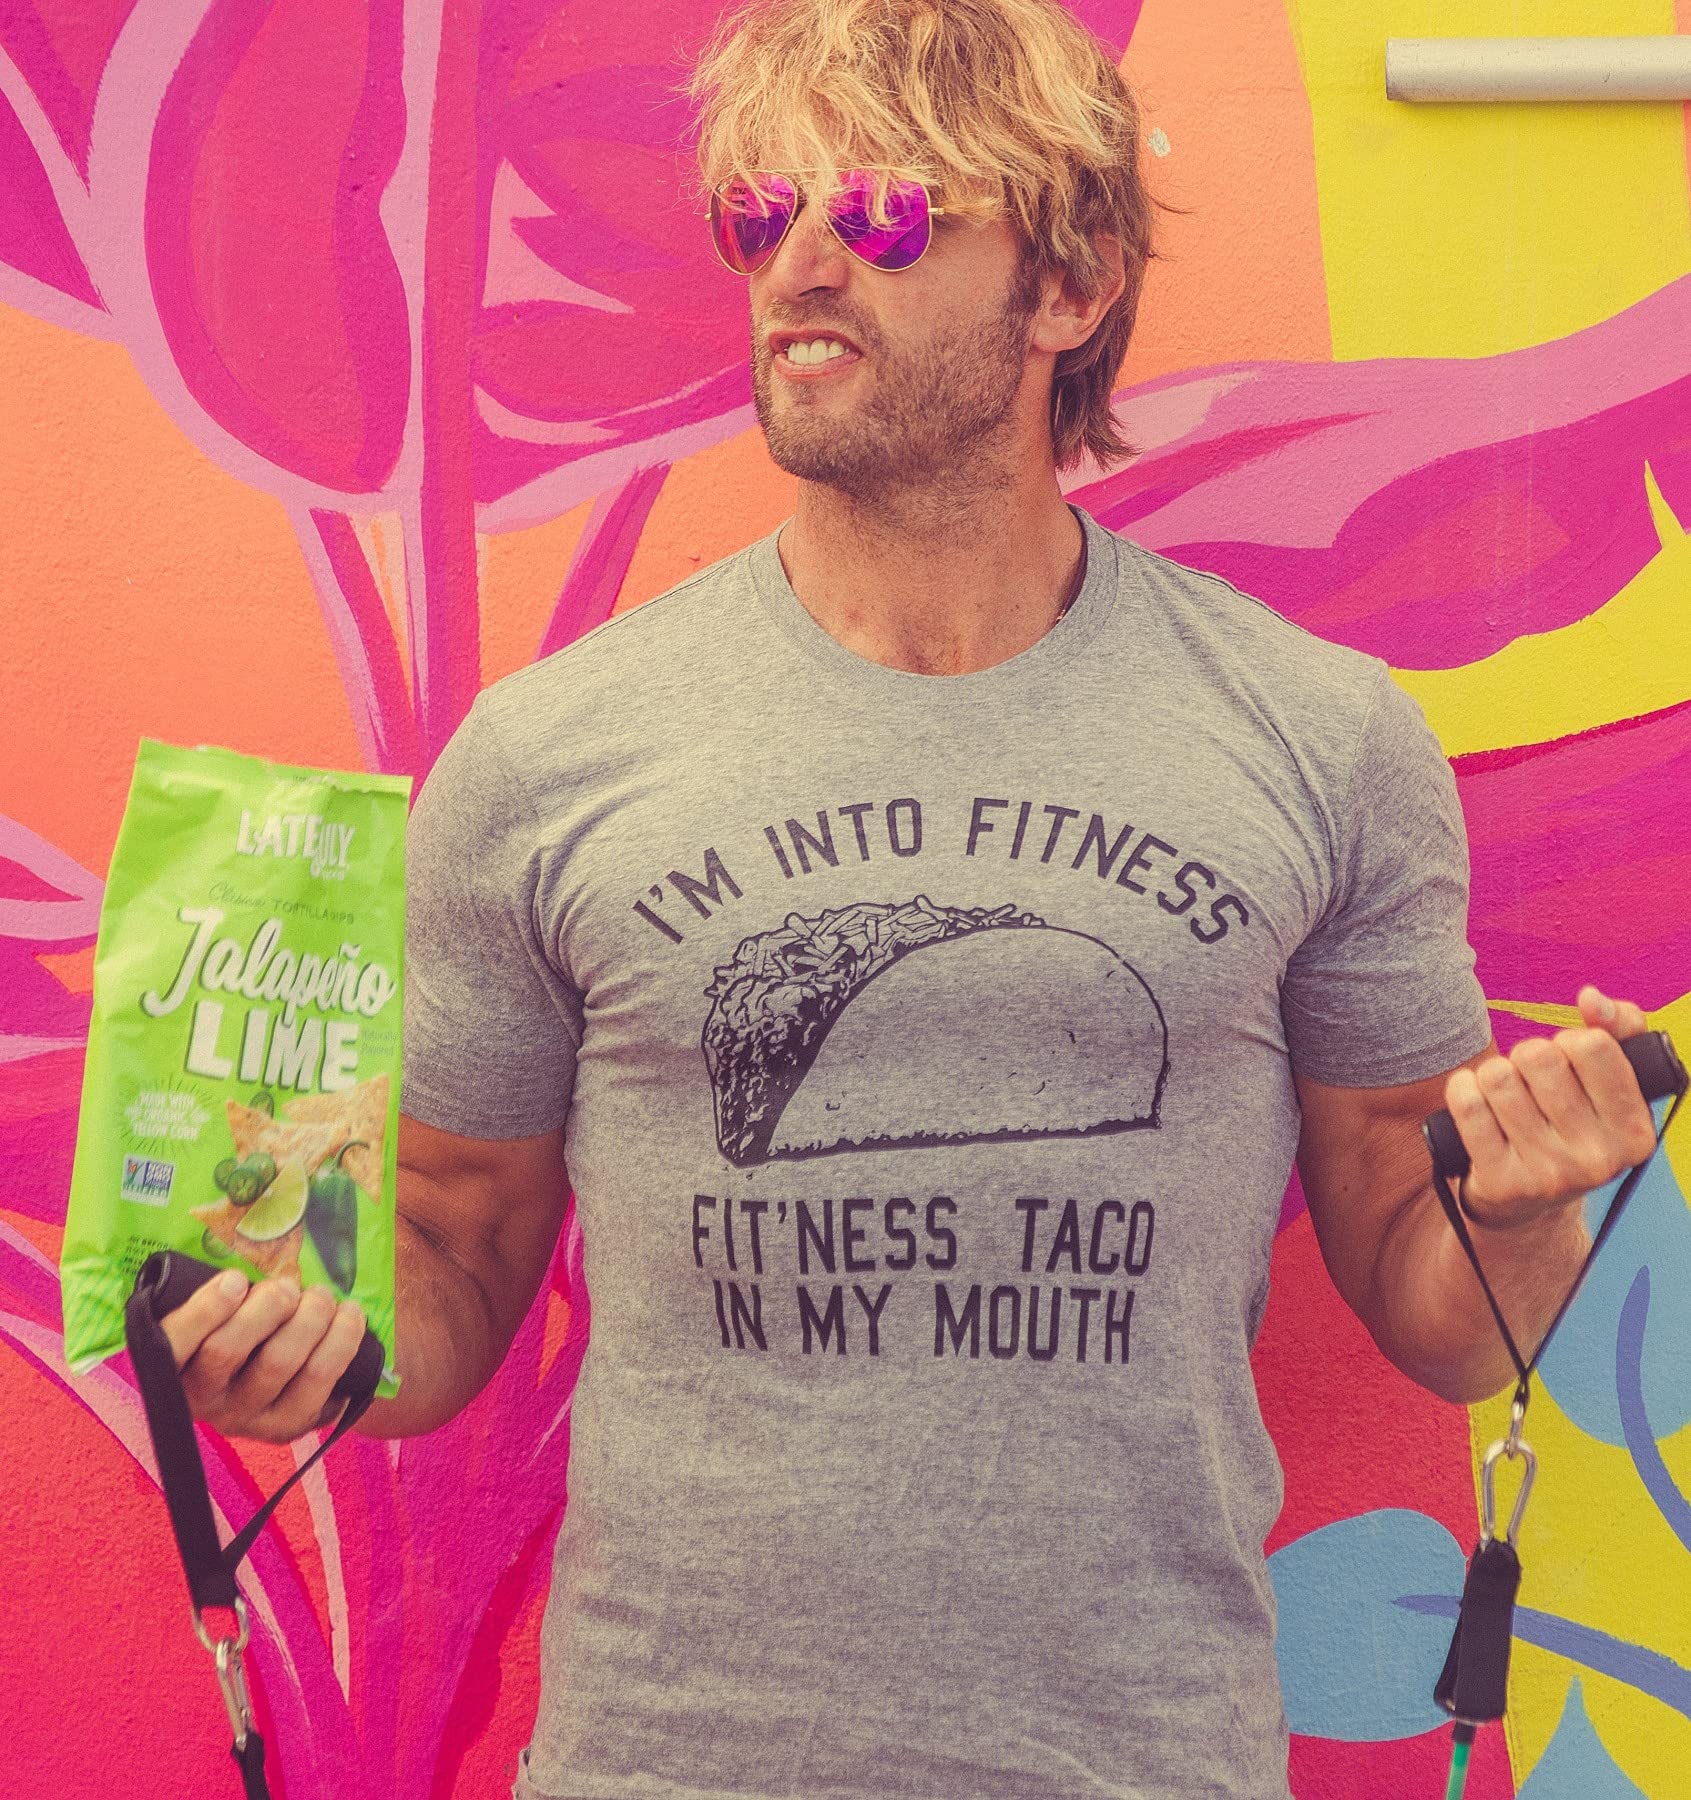 Crazy Dog Mens Graphic Funny T Shirt Im Into Fitness Taco in My Mouth Humor Novelty Shirt